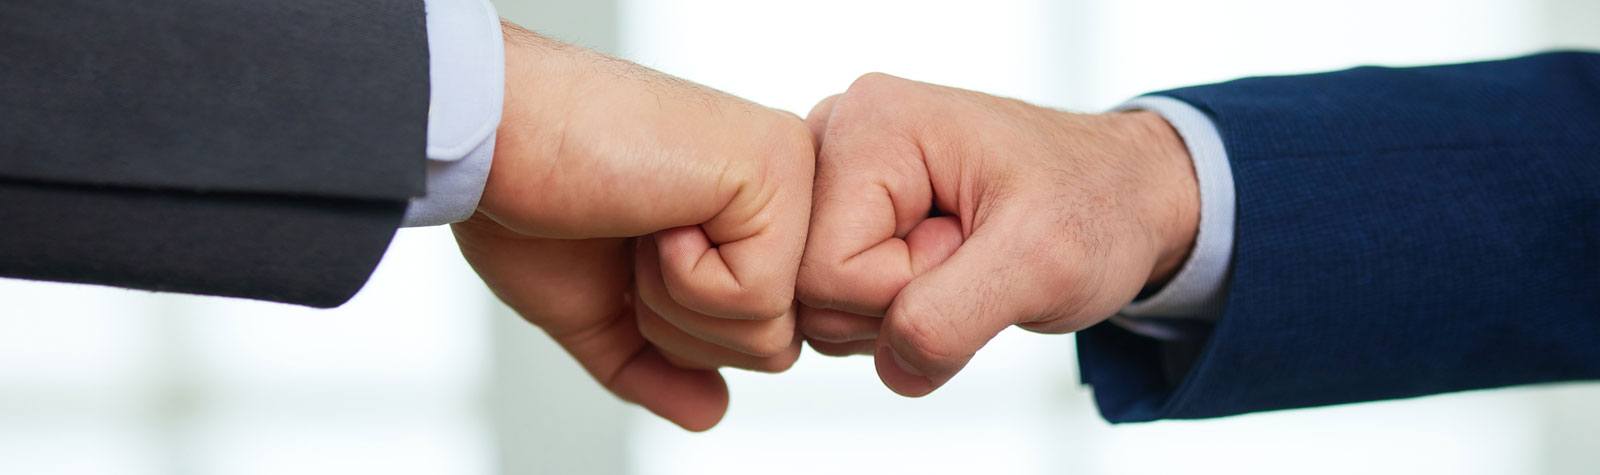 Close-up of hands fist bumping.